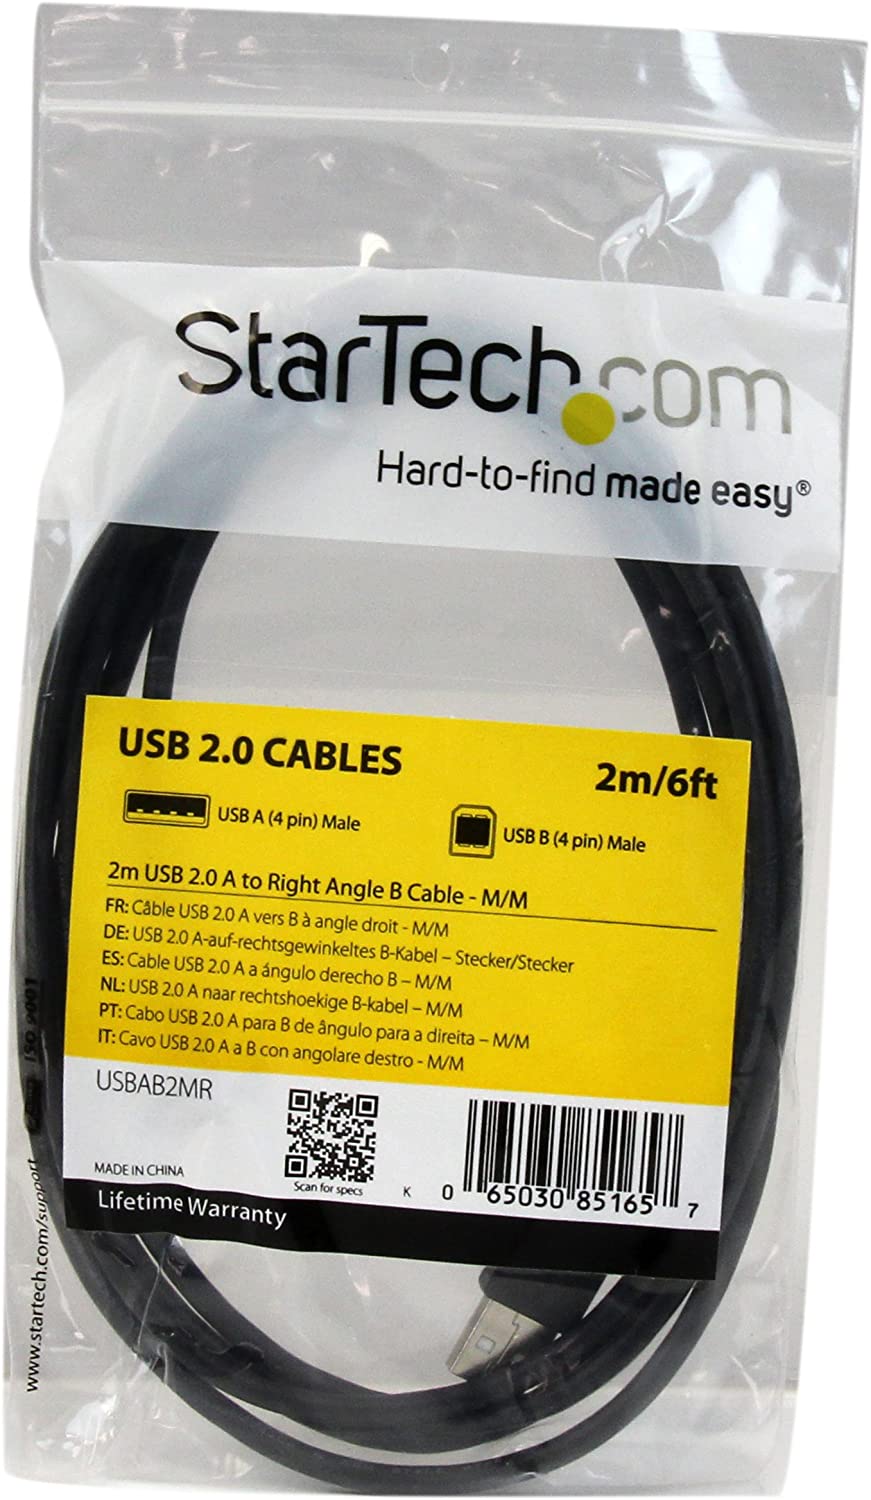 StarTech.com 2m USB 2.0 A to Right Angle B Cable Cord - 2 m USB Printer Cable - Right Angle USB B Cable - 1x USB A (M), 1x USB B (M) (USBAB2MR) Right Angled Connector 6 ft / 2m